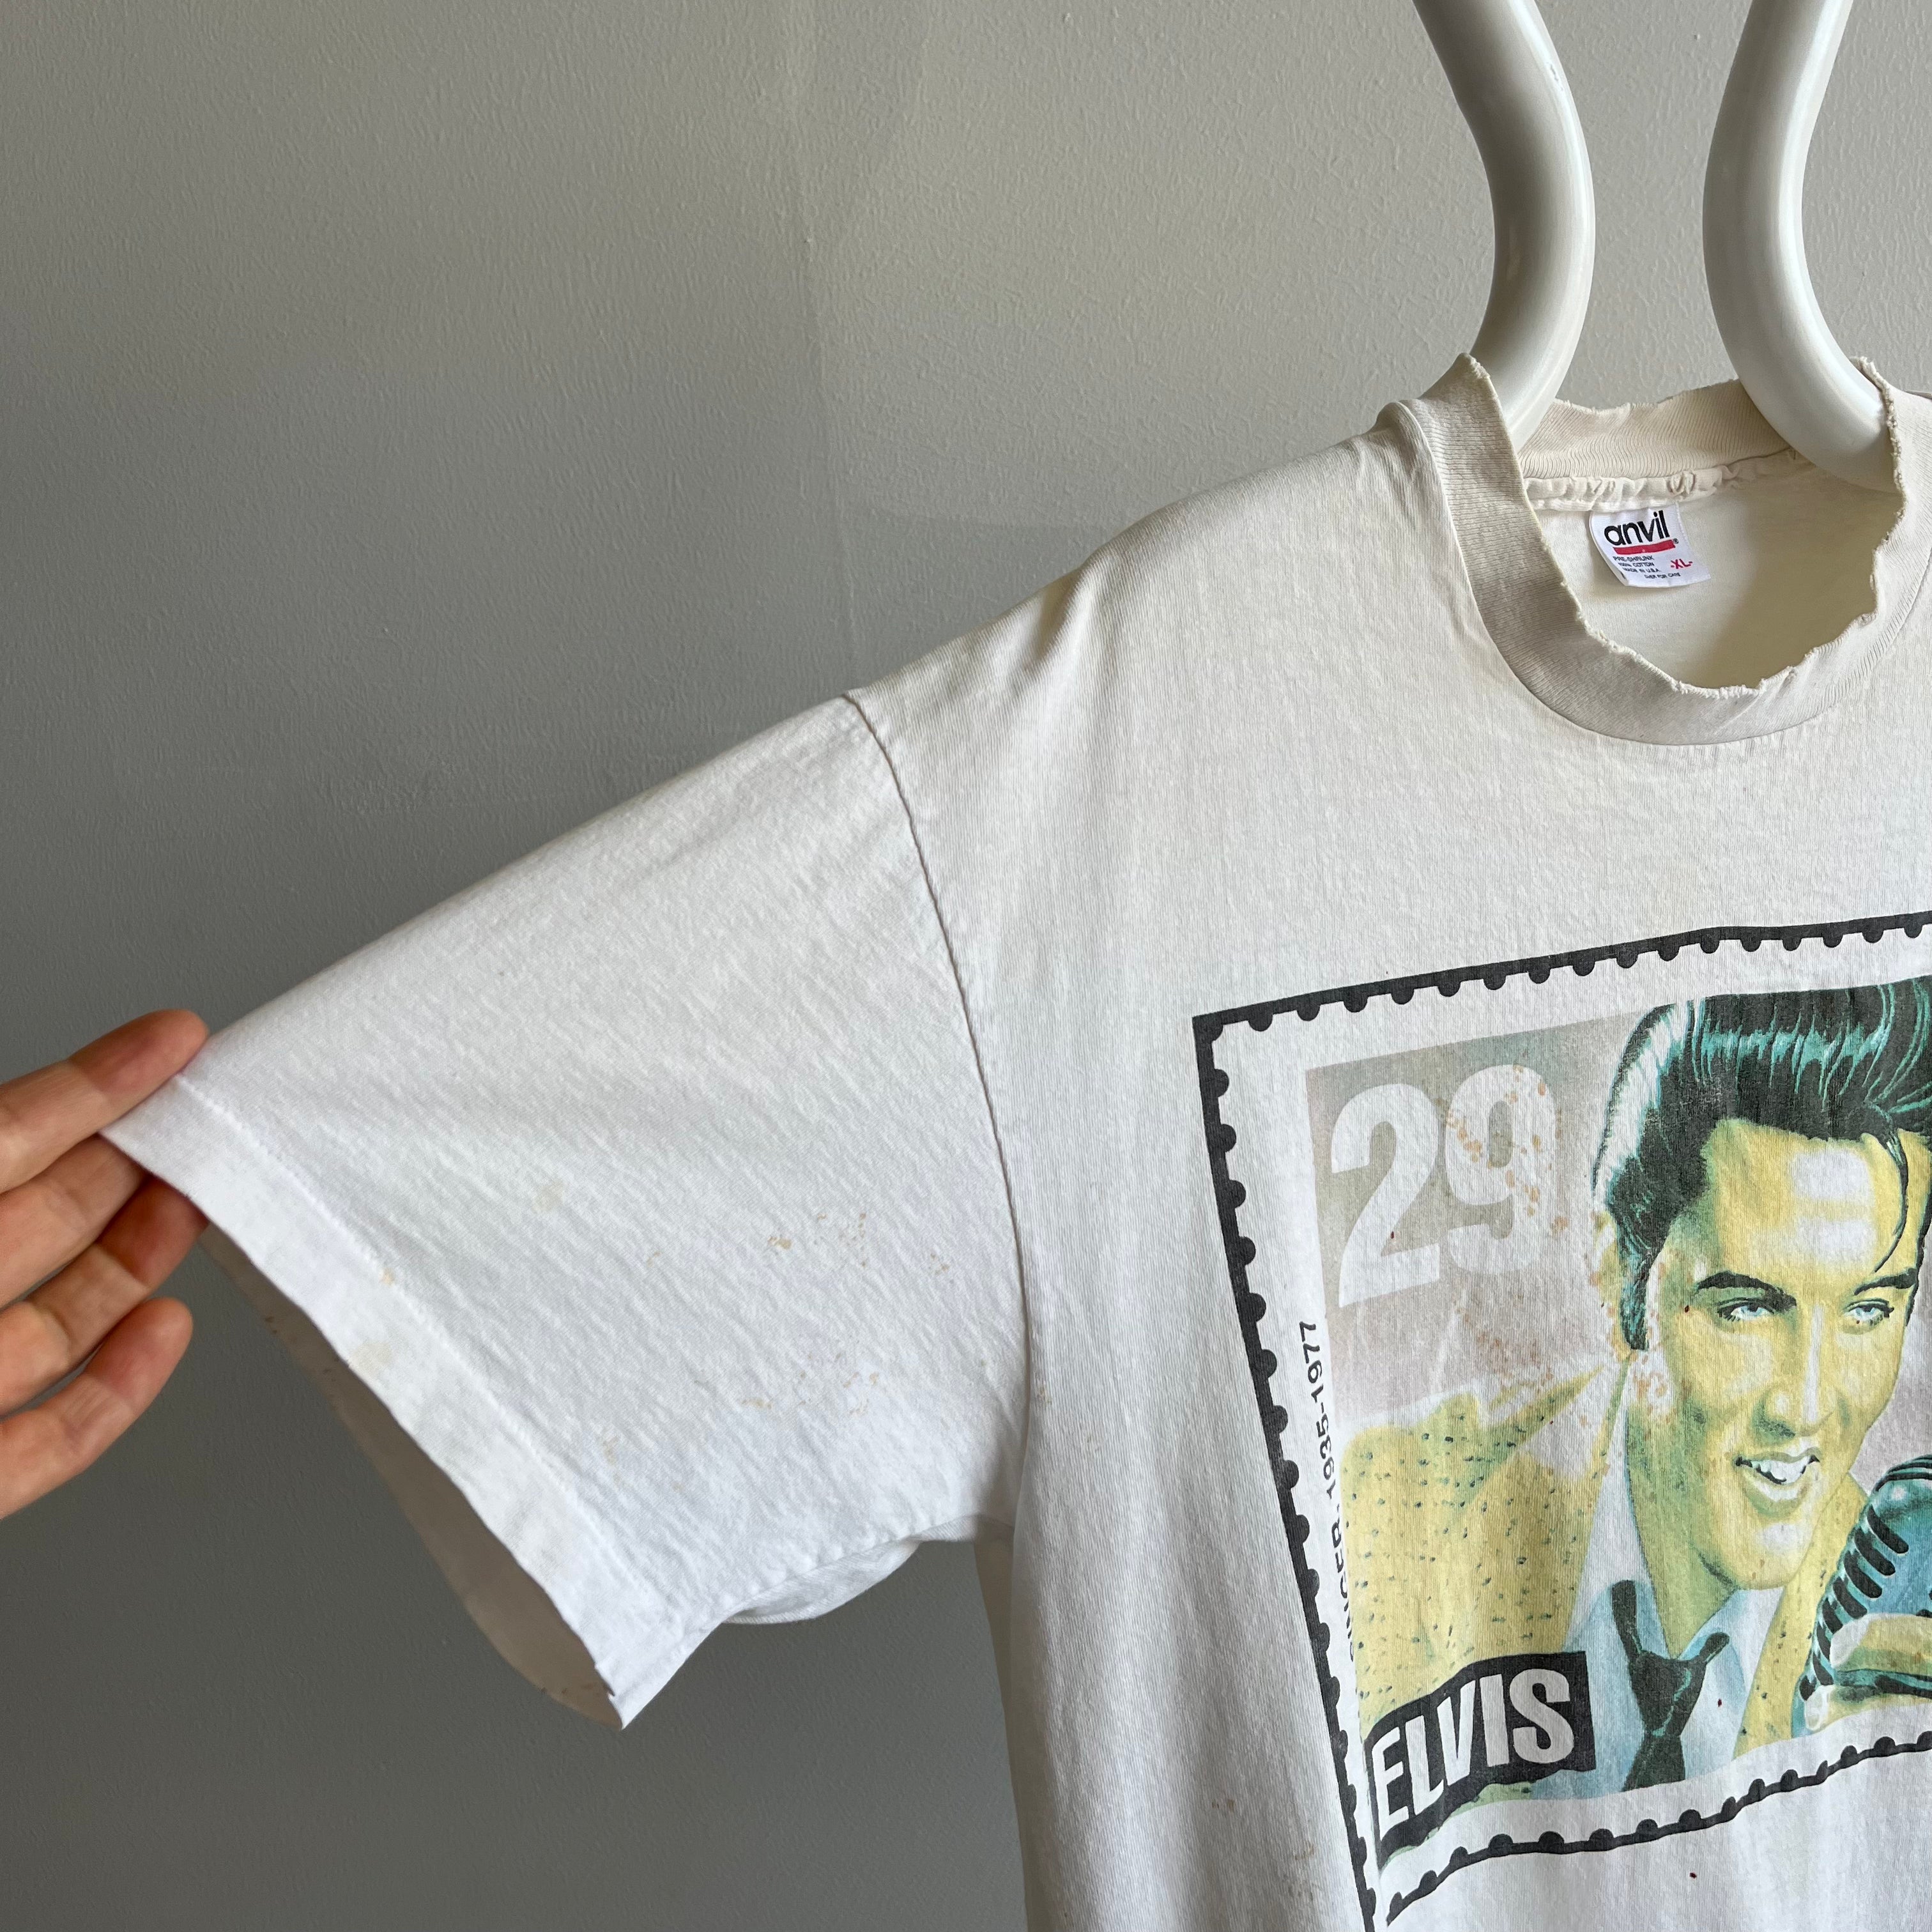 1992 Epically Thrashed and Stained Elvis T-Shirt